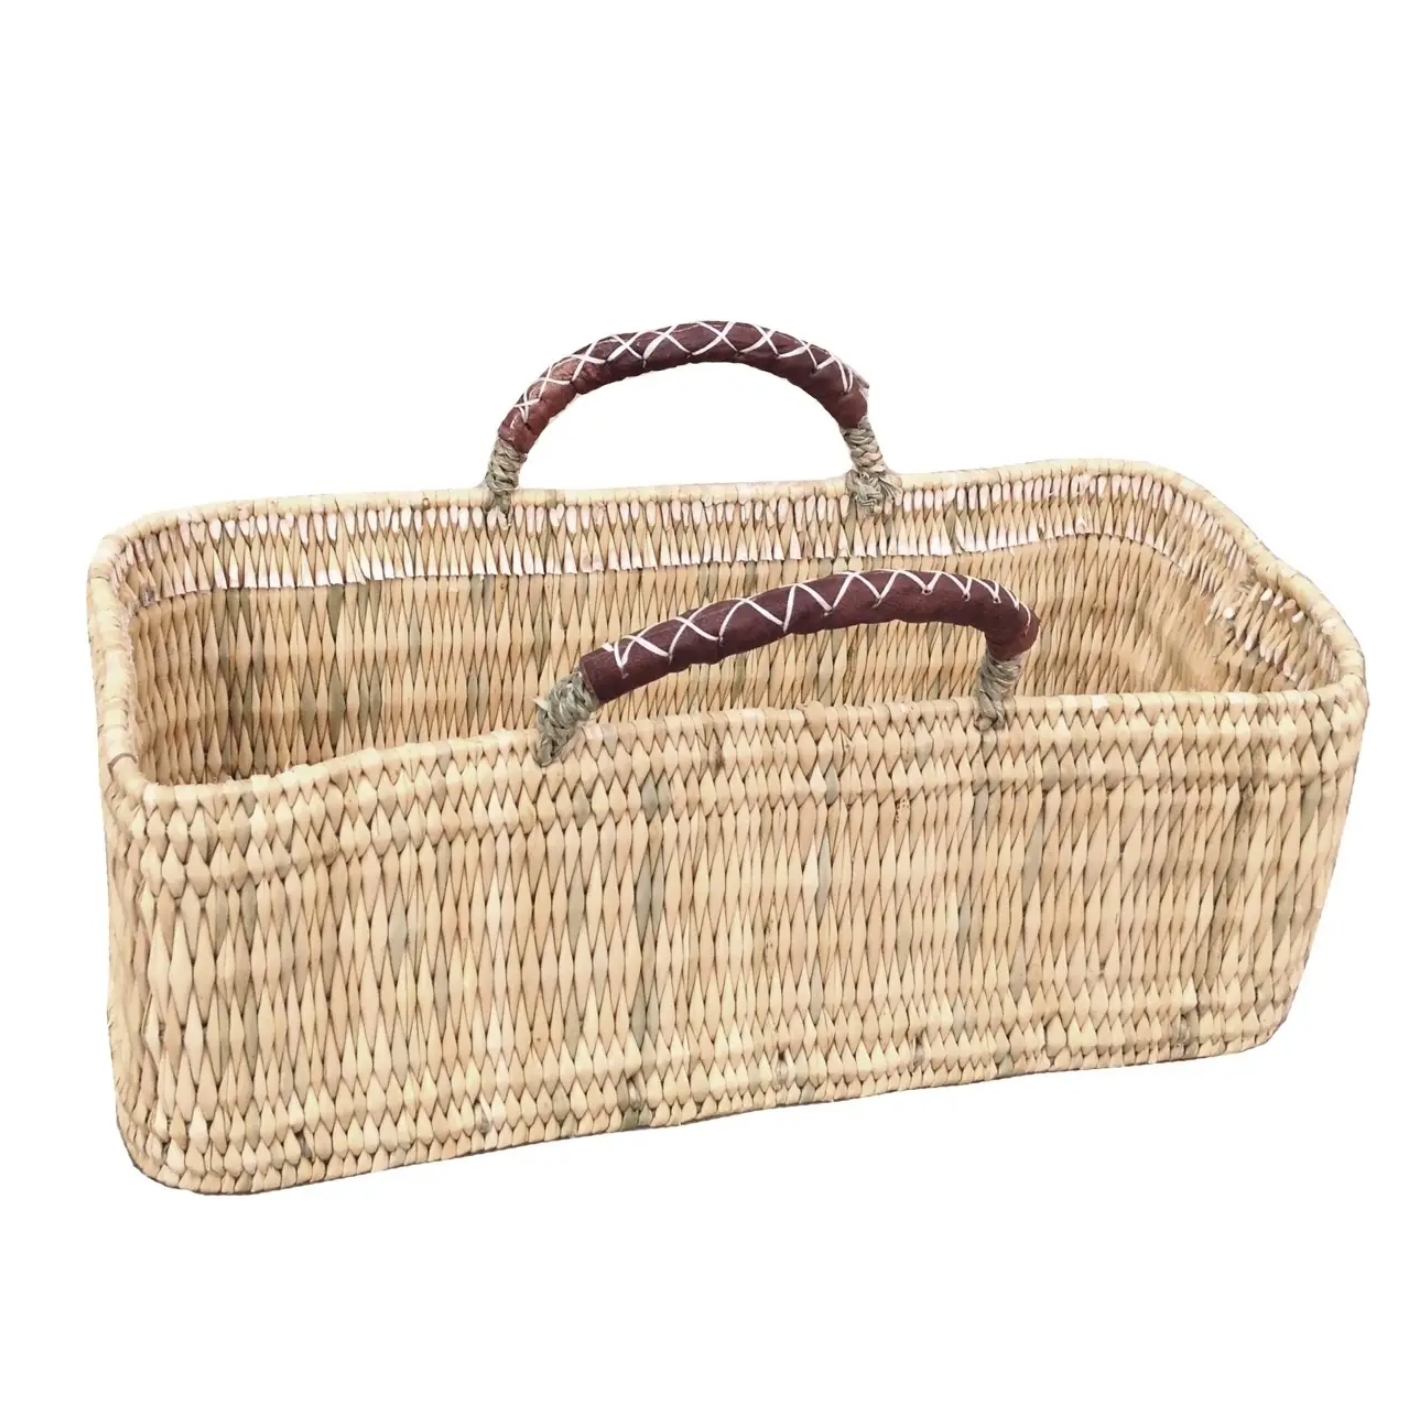 Narrow rectangular handled basket handmade in Morocco with ethically-sourced woven palm leaves and naturally tanned leather